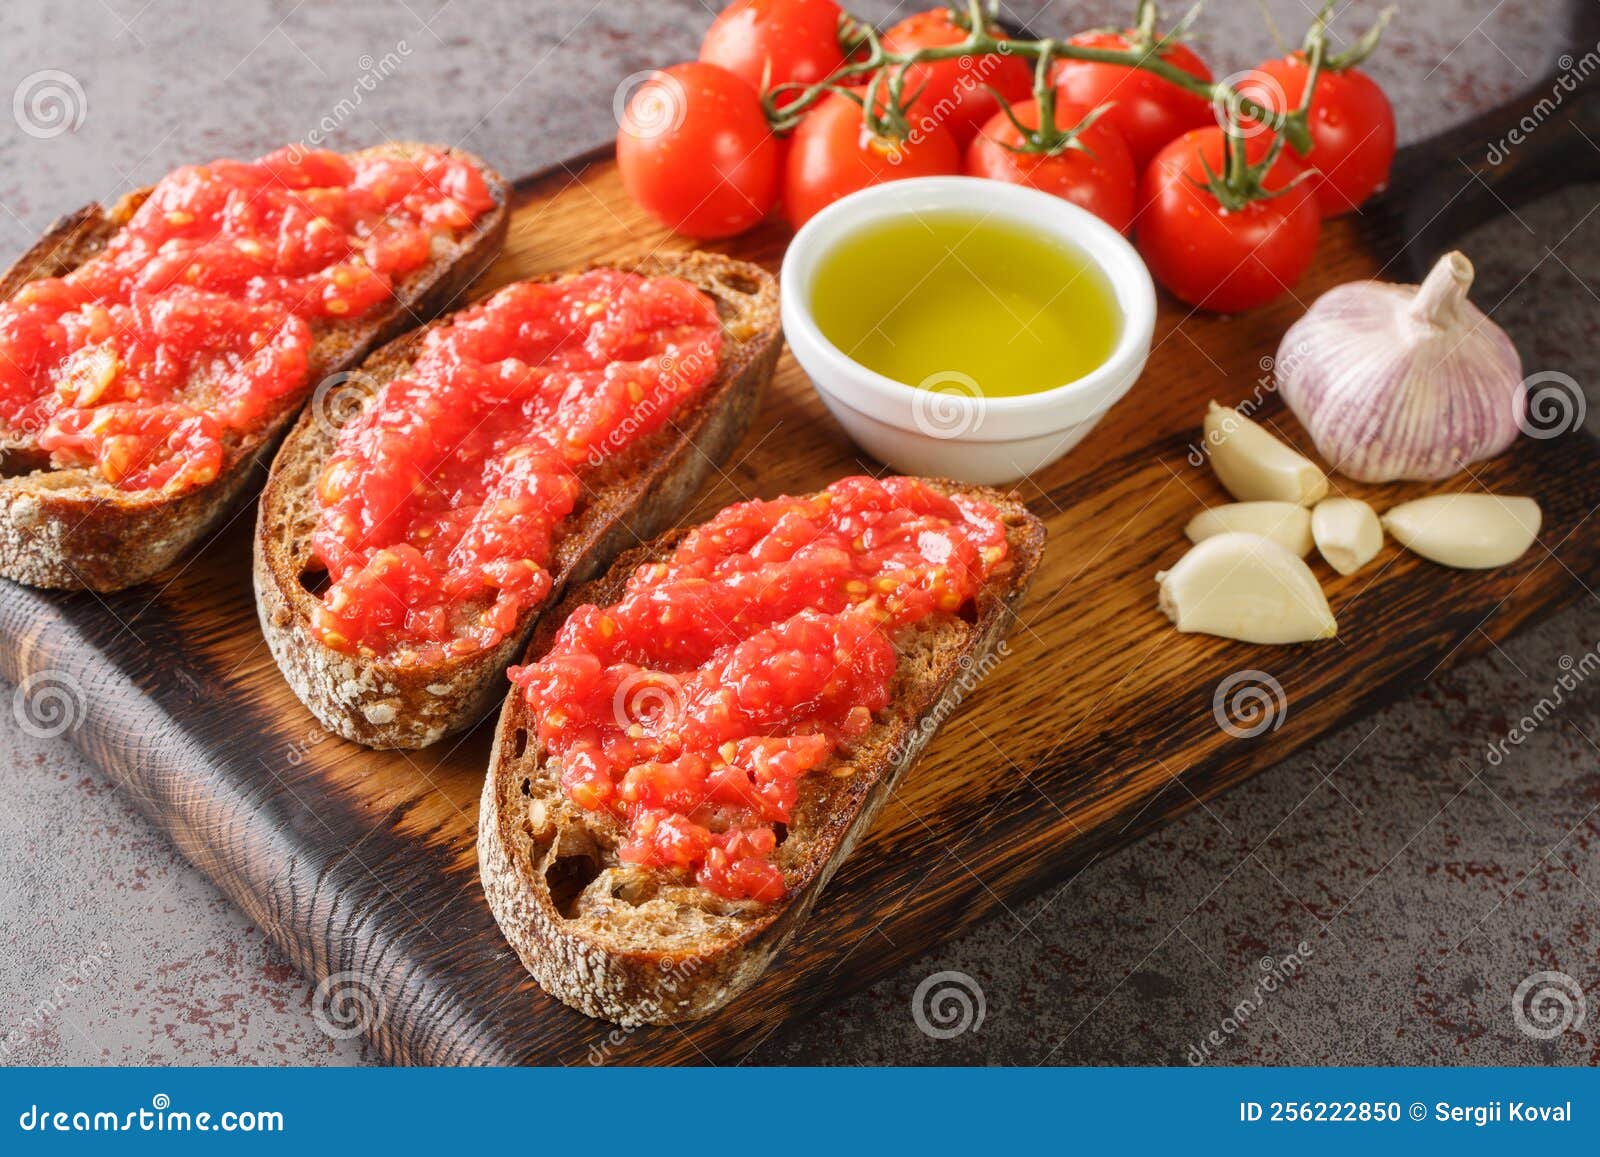 catalan pan con tomate spanish toasted bread rubbed with fresh garlic and ripe tomato, then drizzled with olive oil closeup on the